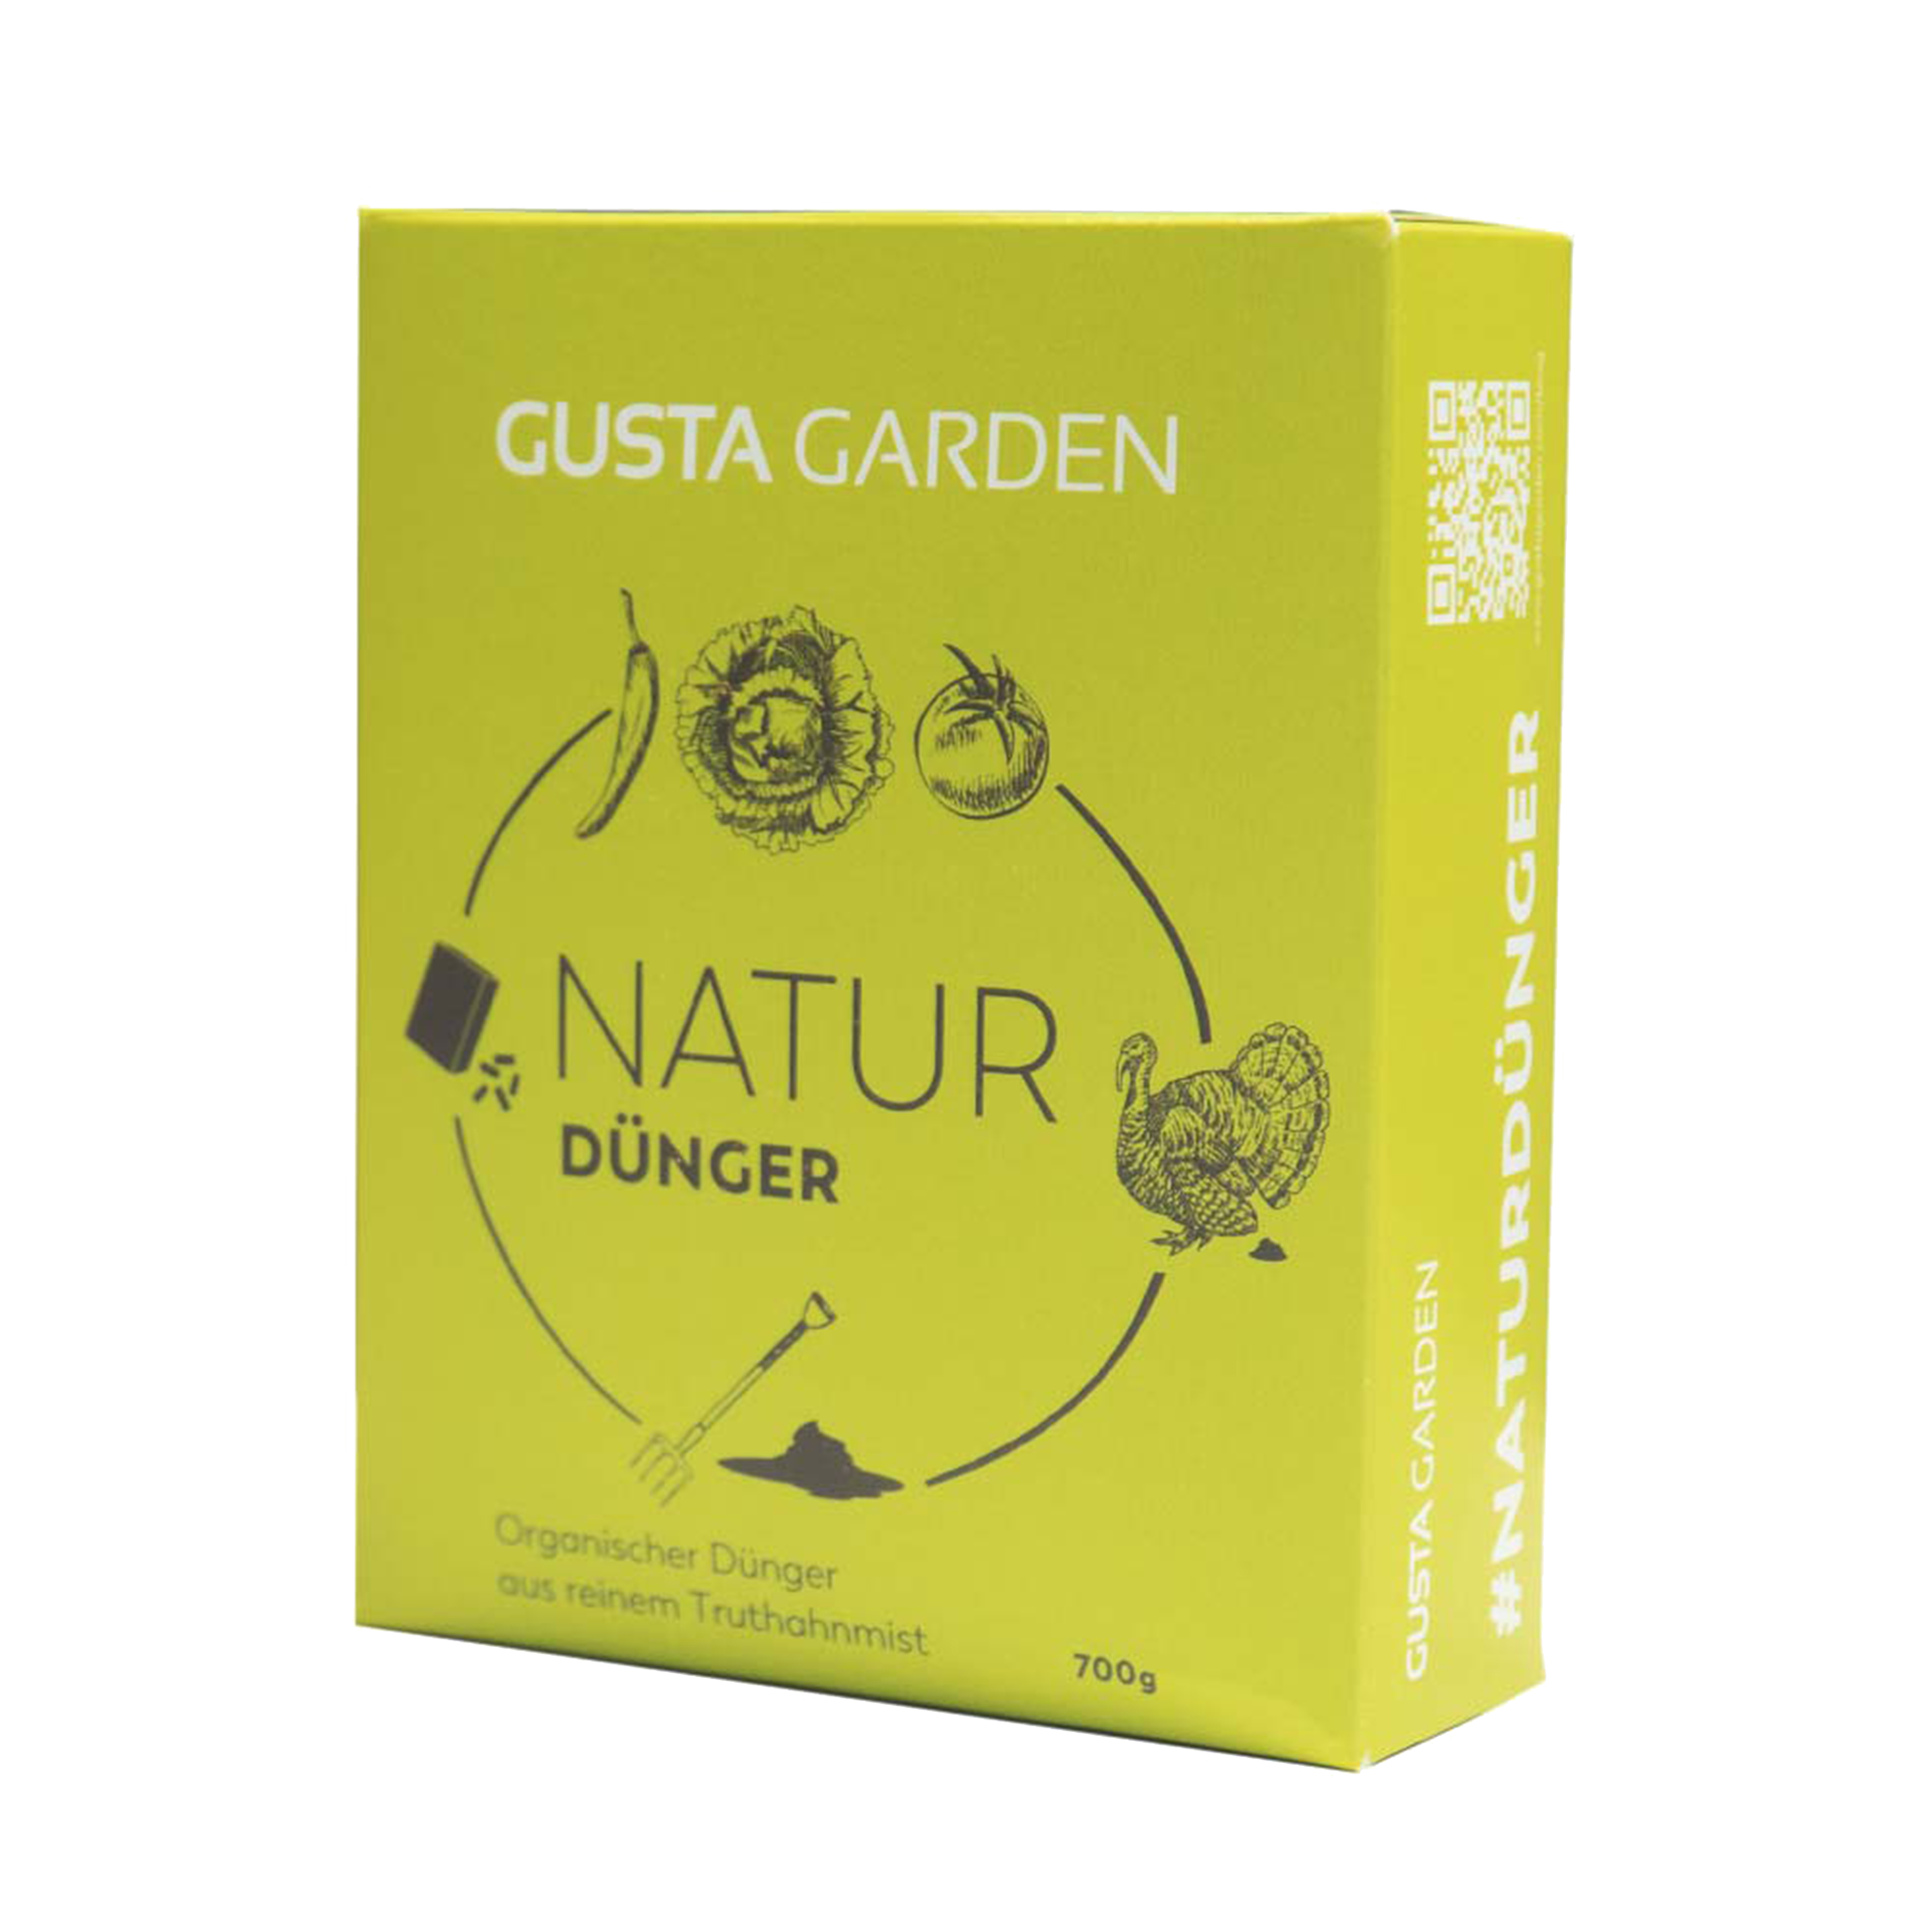 Natural fertilizer made from pure turkey manure